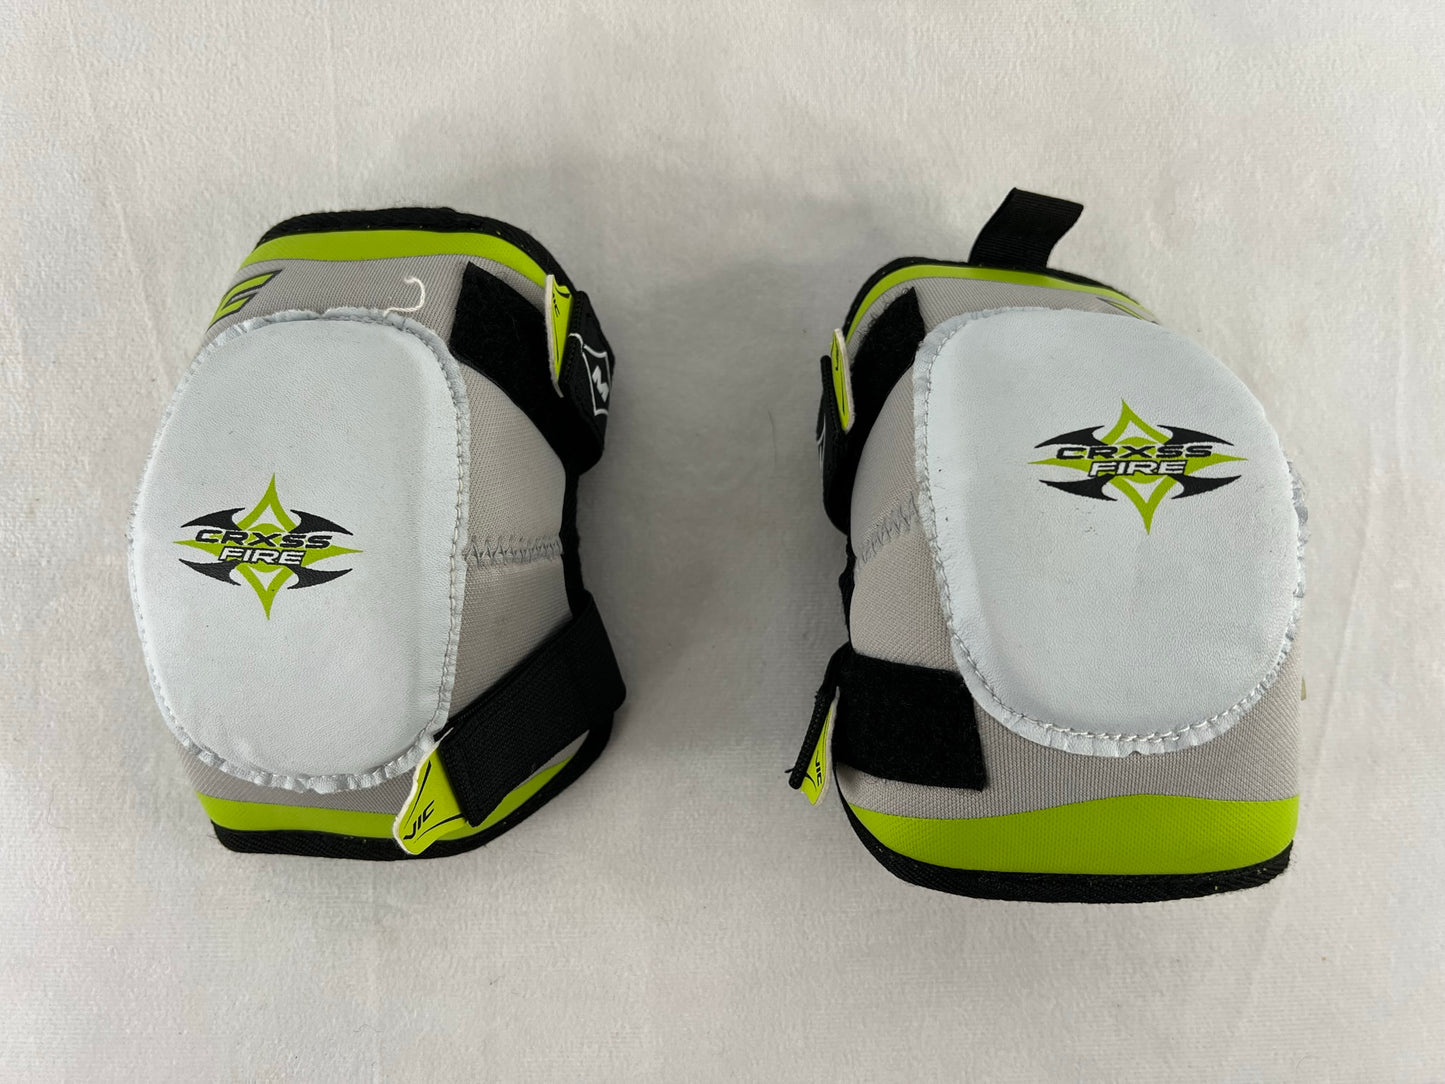 Hockey Elbow Pads Child Size Y Medium Age 5-6 Vic Crxss Fire Grey Lime Excellent